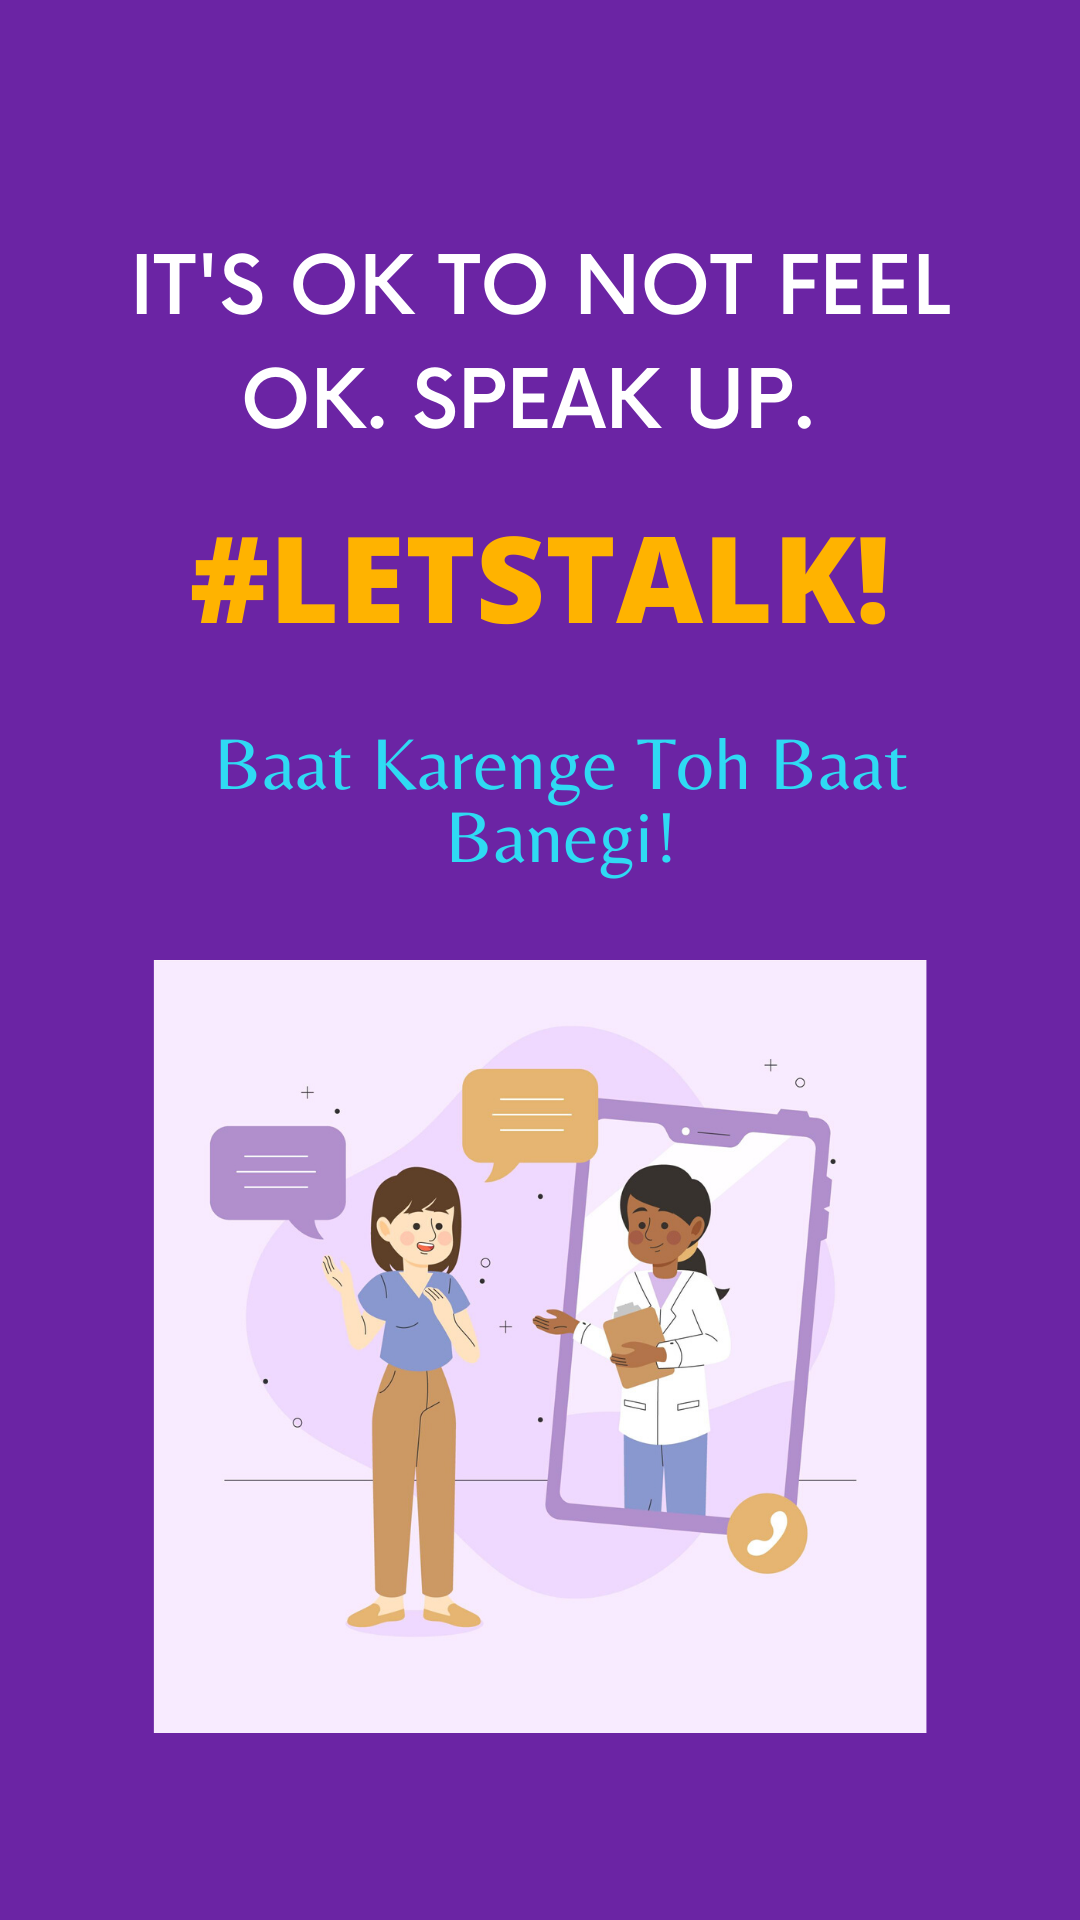 Do Your Thng Launches Mental Health Campaign “Baat Karenge toh Baat Banegi” With Let’s TALK decoding=